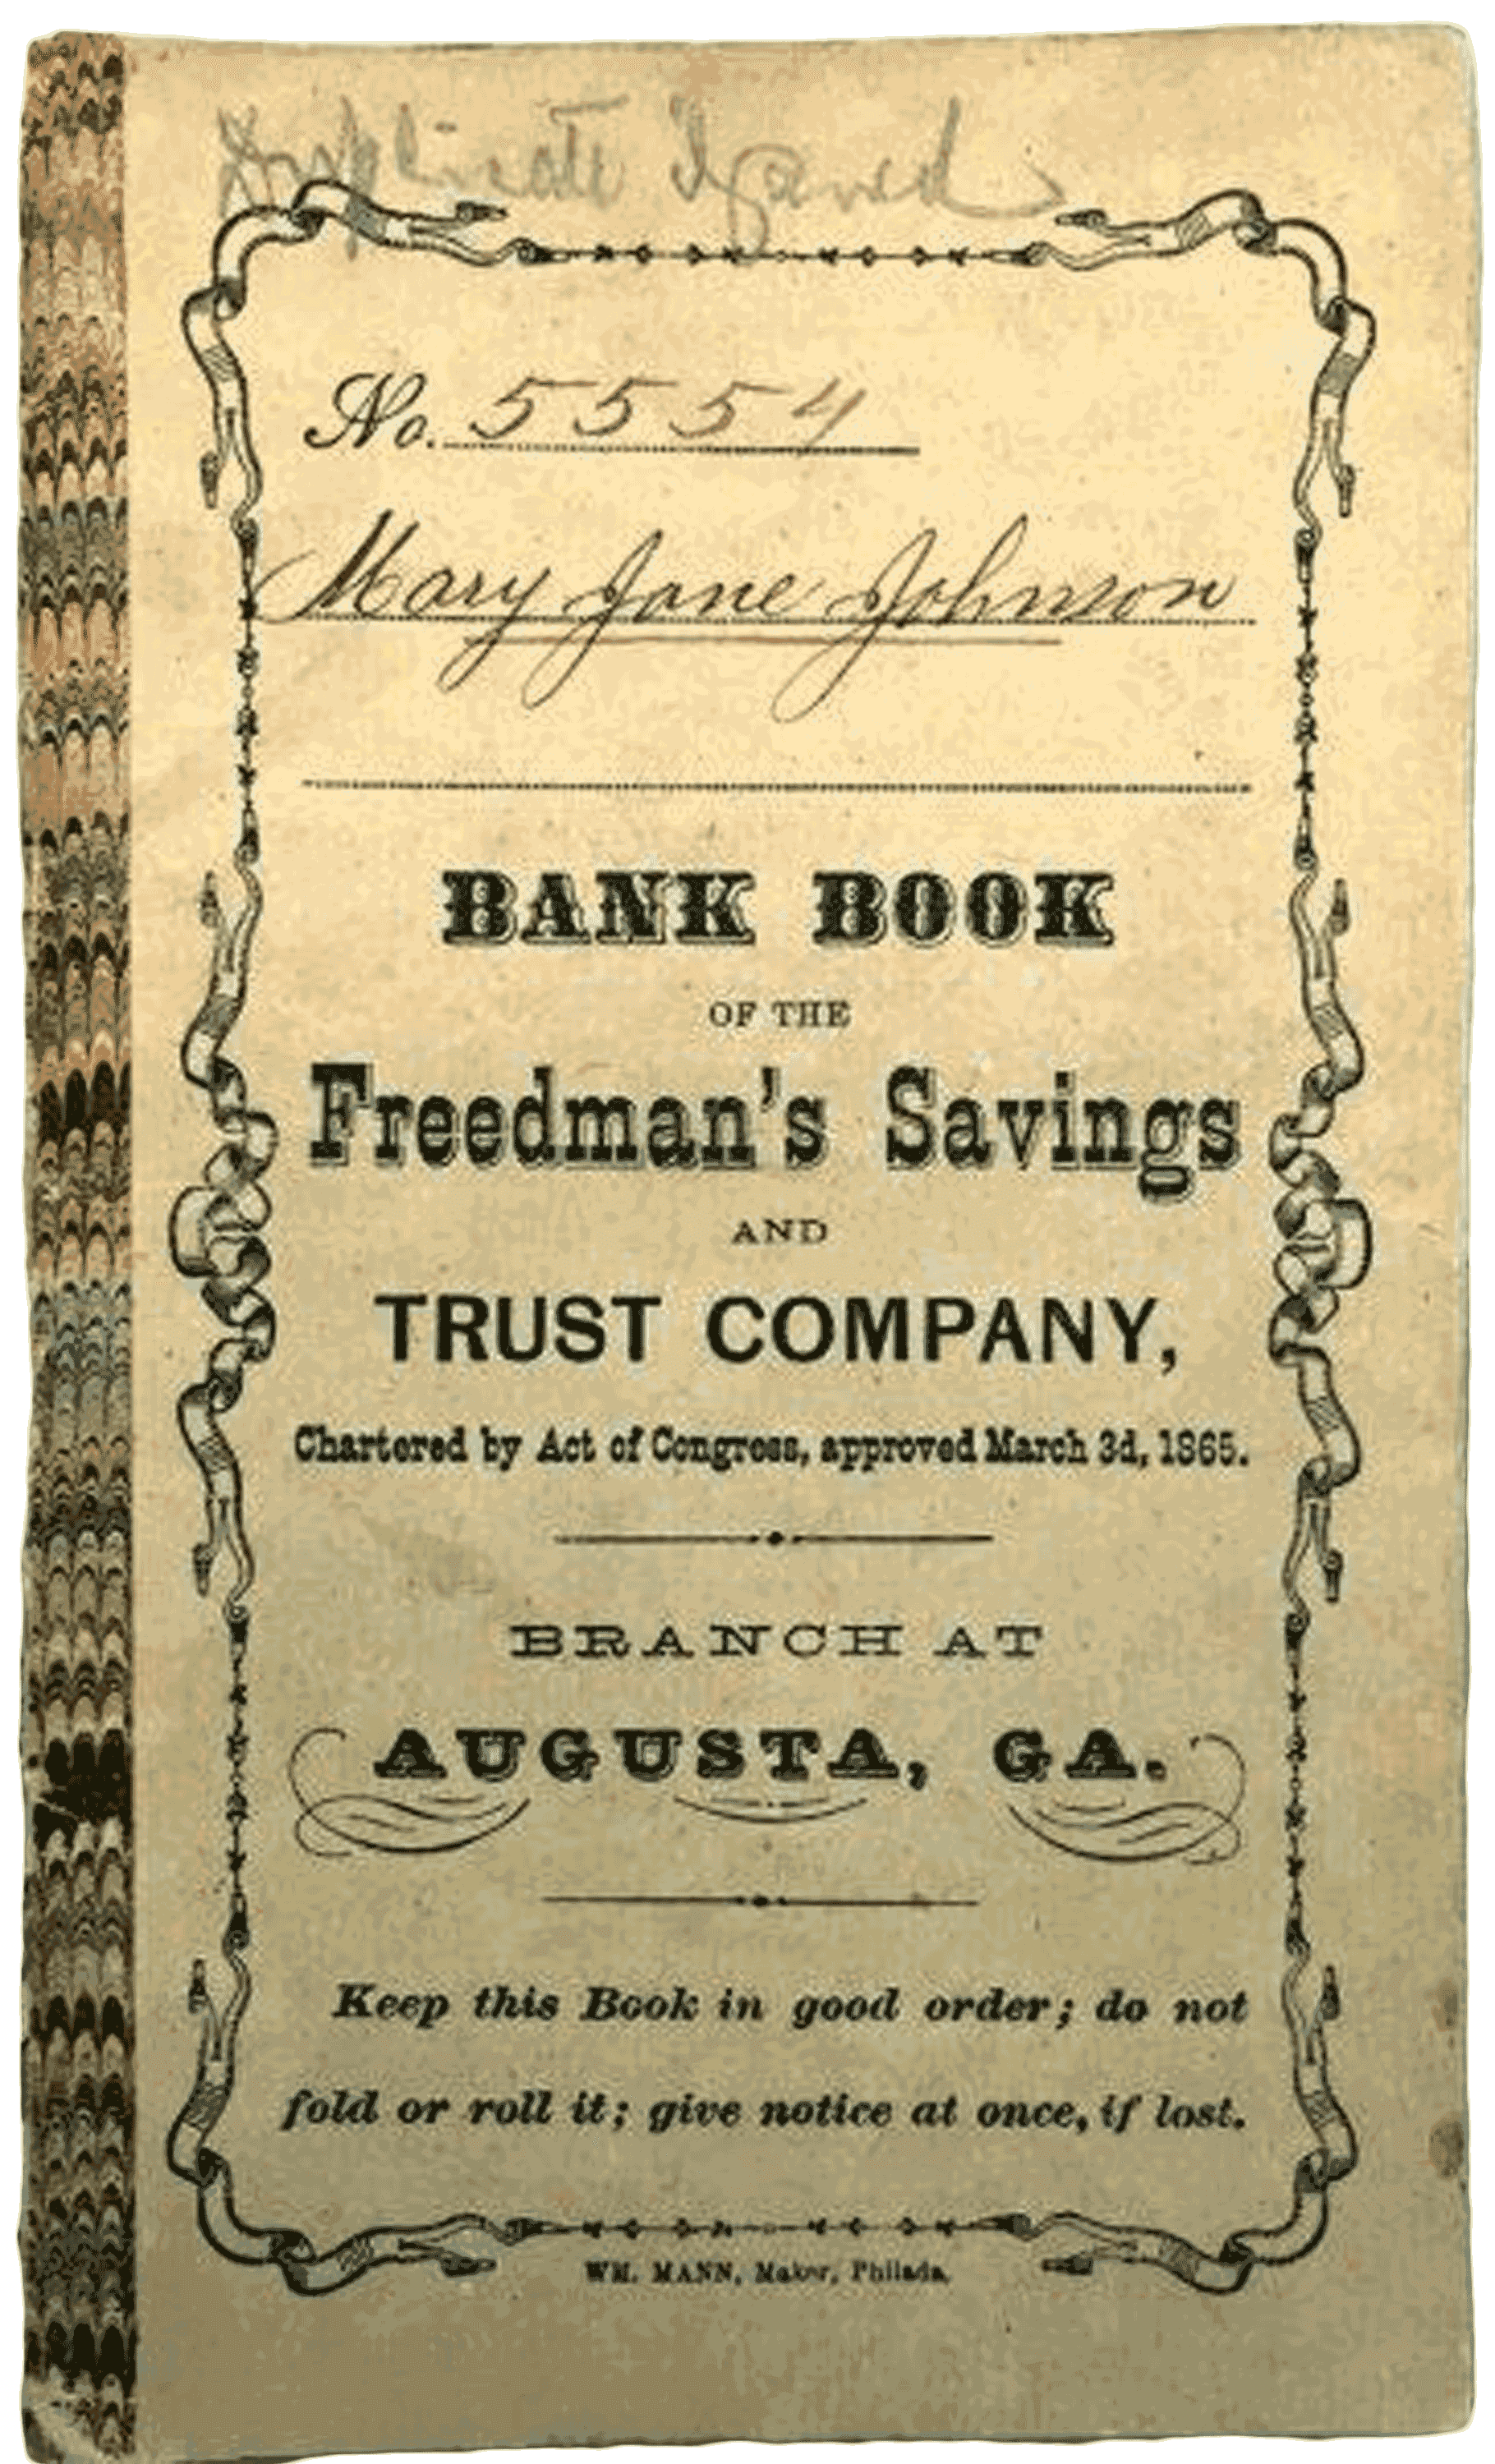 The front cover of Mary Jane Johnson’s bank book is signed and numbered 5554.